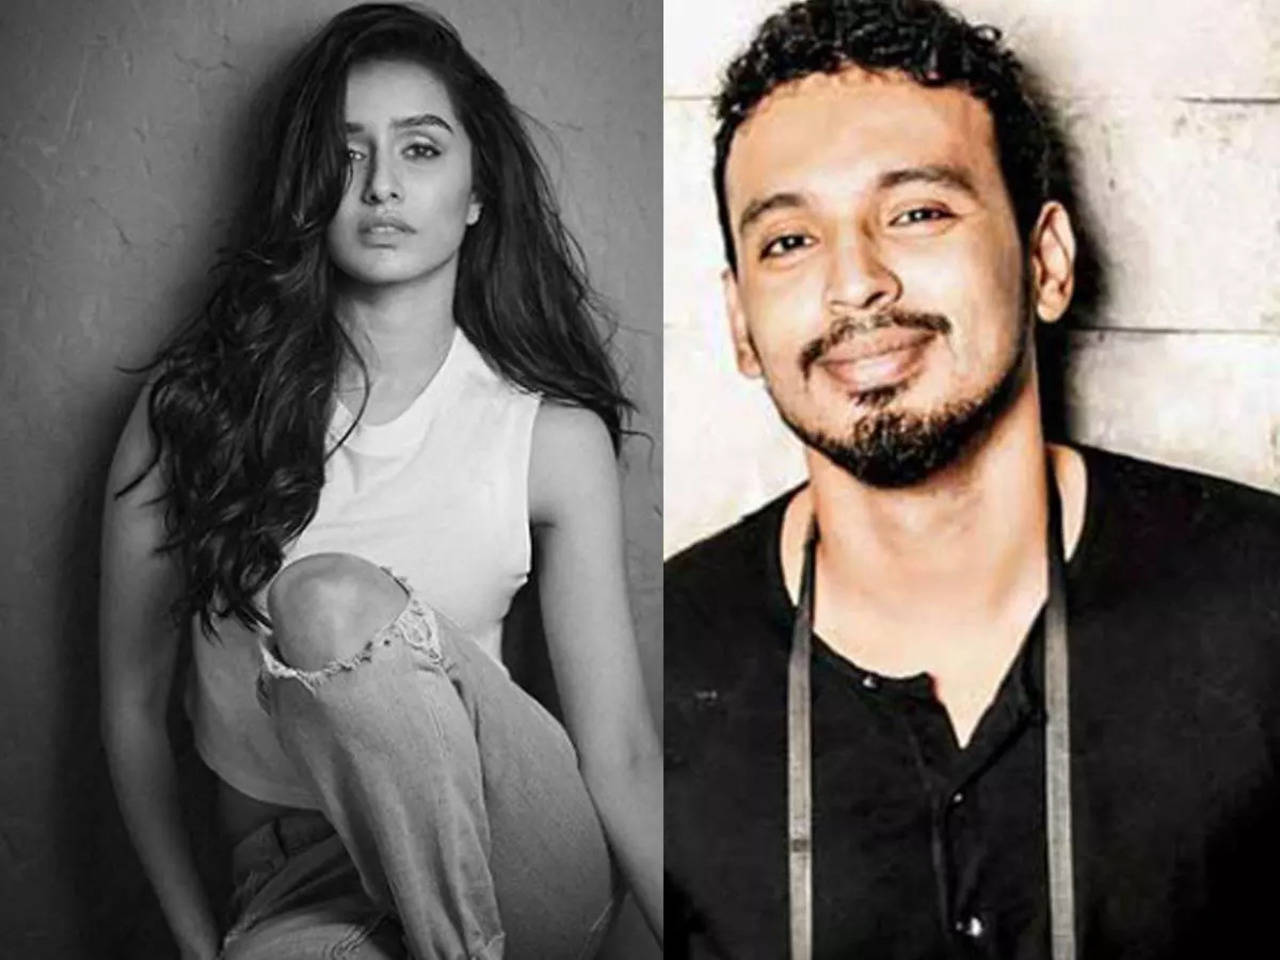 Shraddha Kapoor and Rohan Shrestha part ways after dating for 4 years |  Hindi Movie News - Times of India